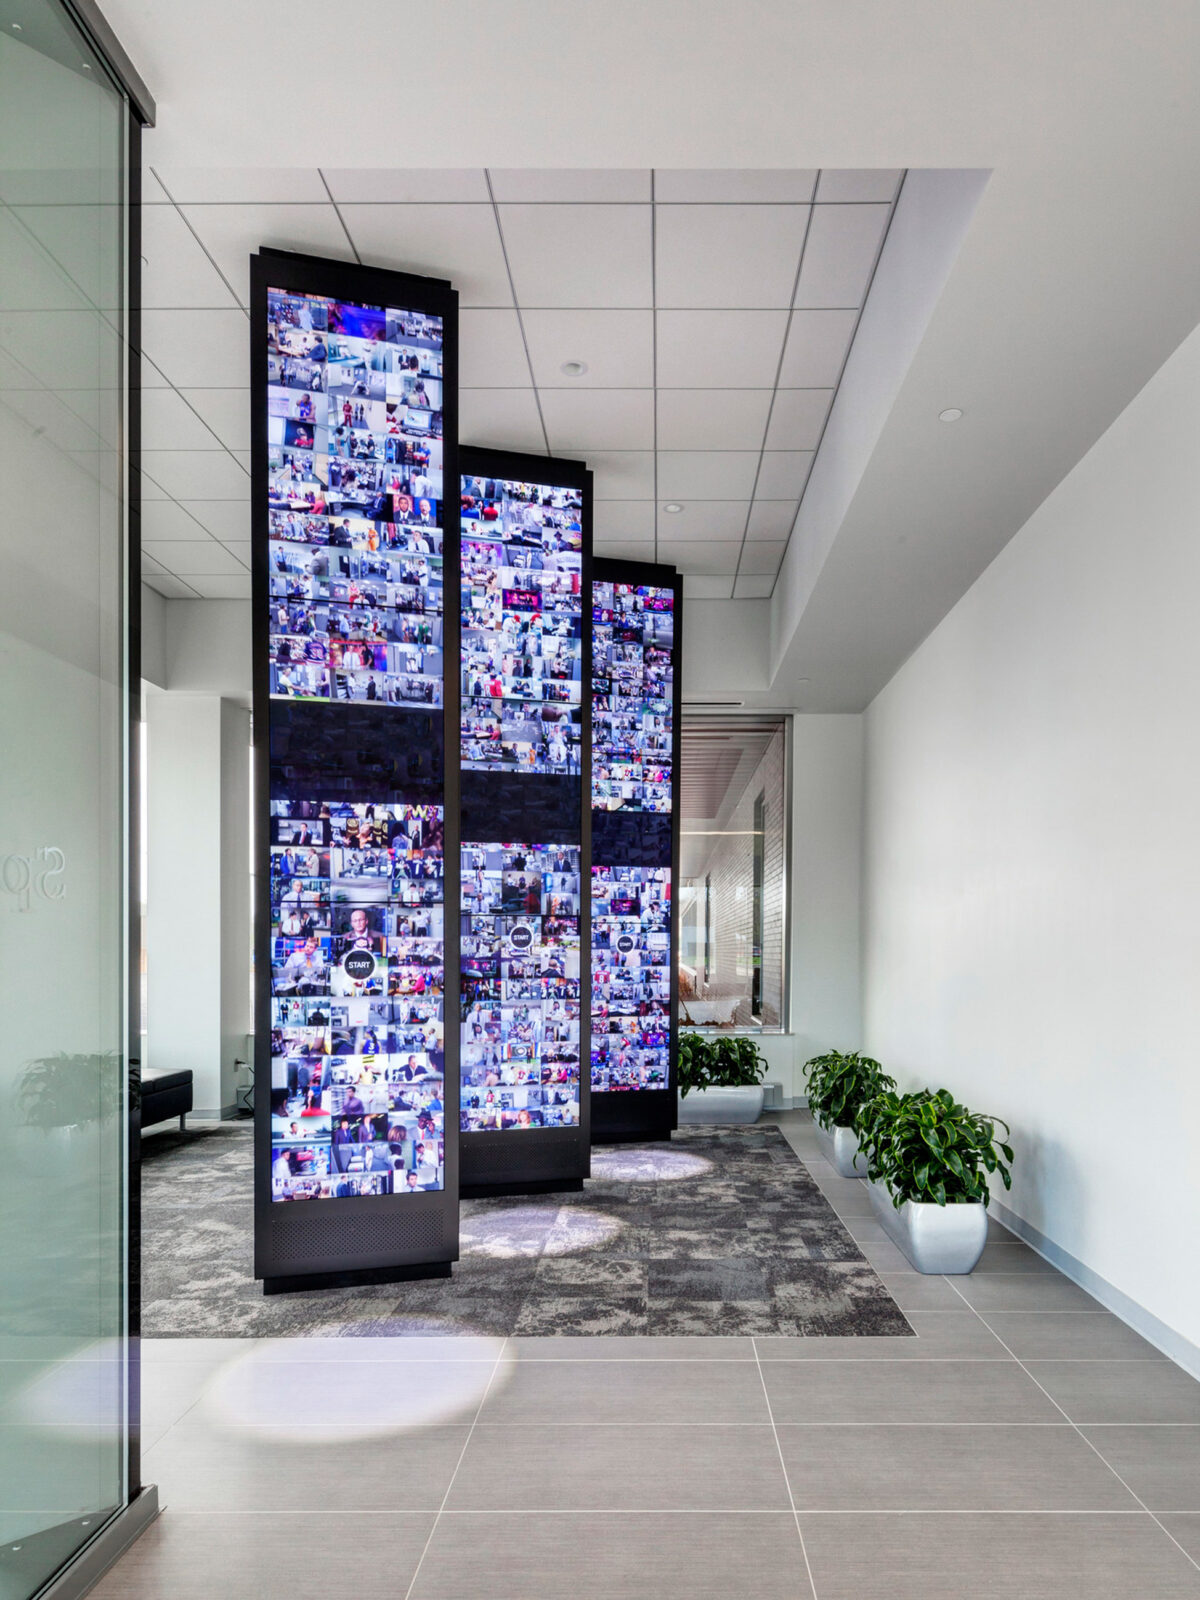 Modern office interior featuring an interactive media wall composed of multiple digital screens displaying dynamic content, contrasted with minimalist decor and neutral tones.